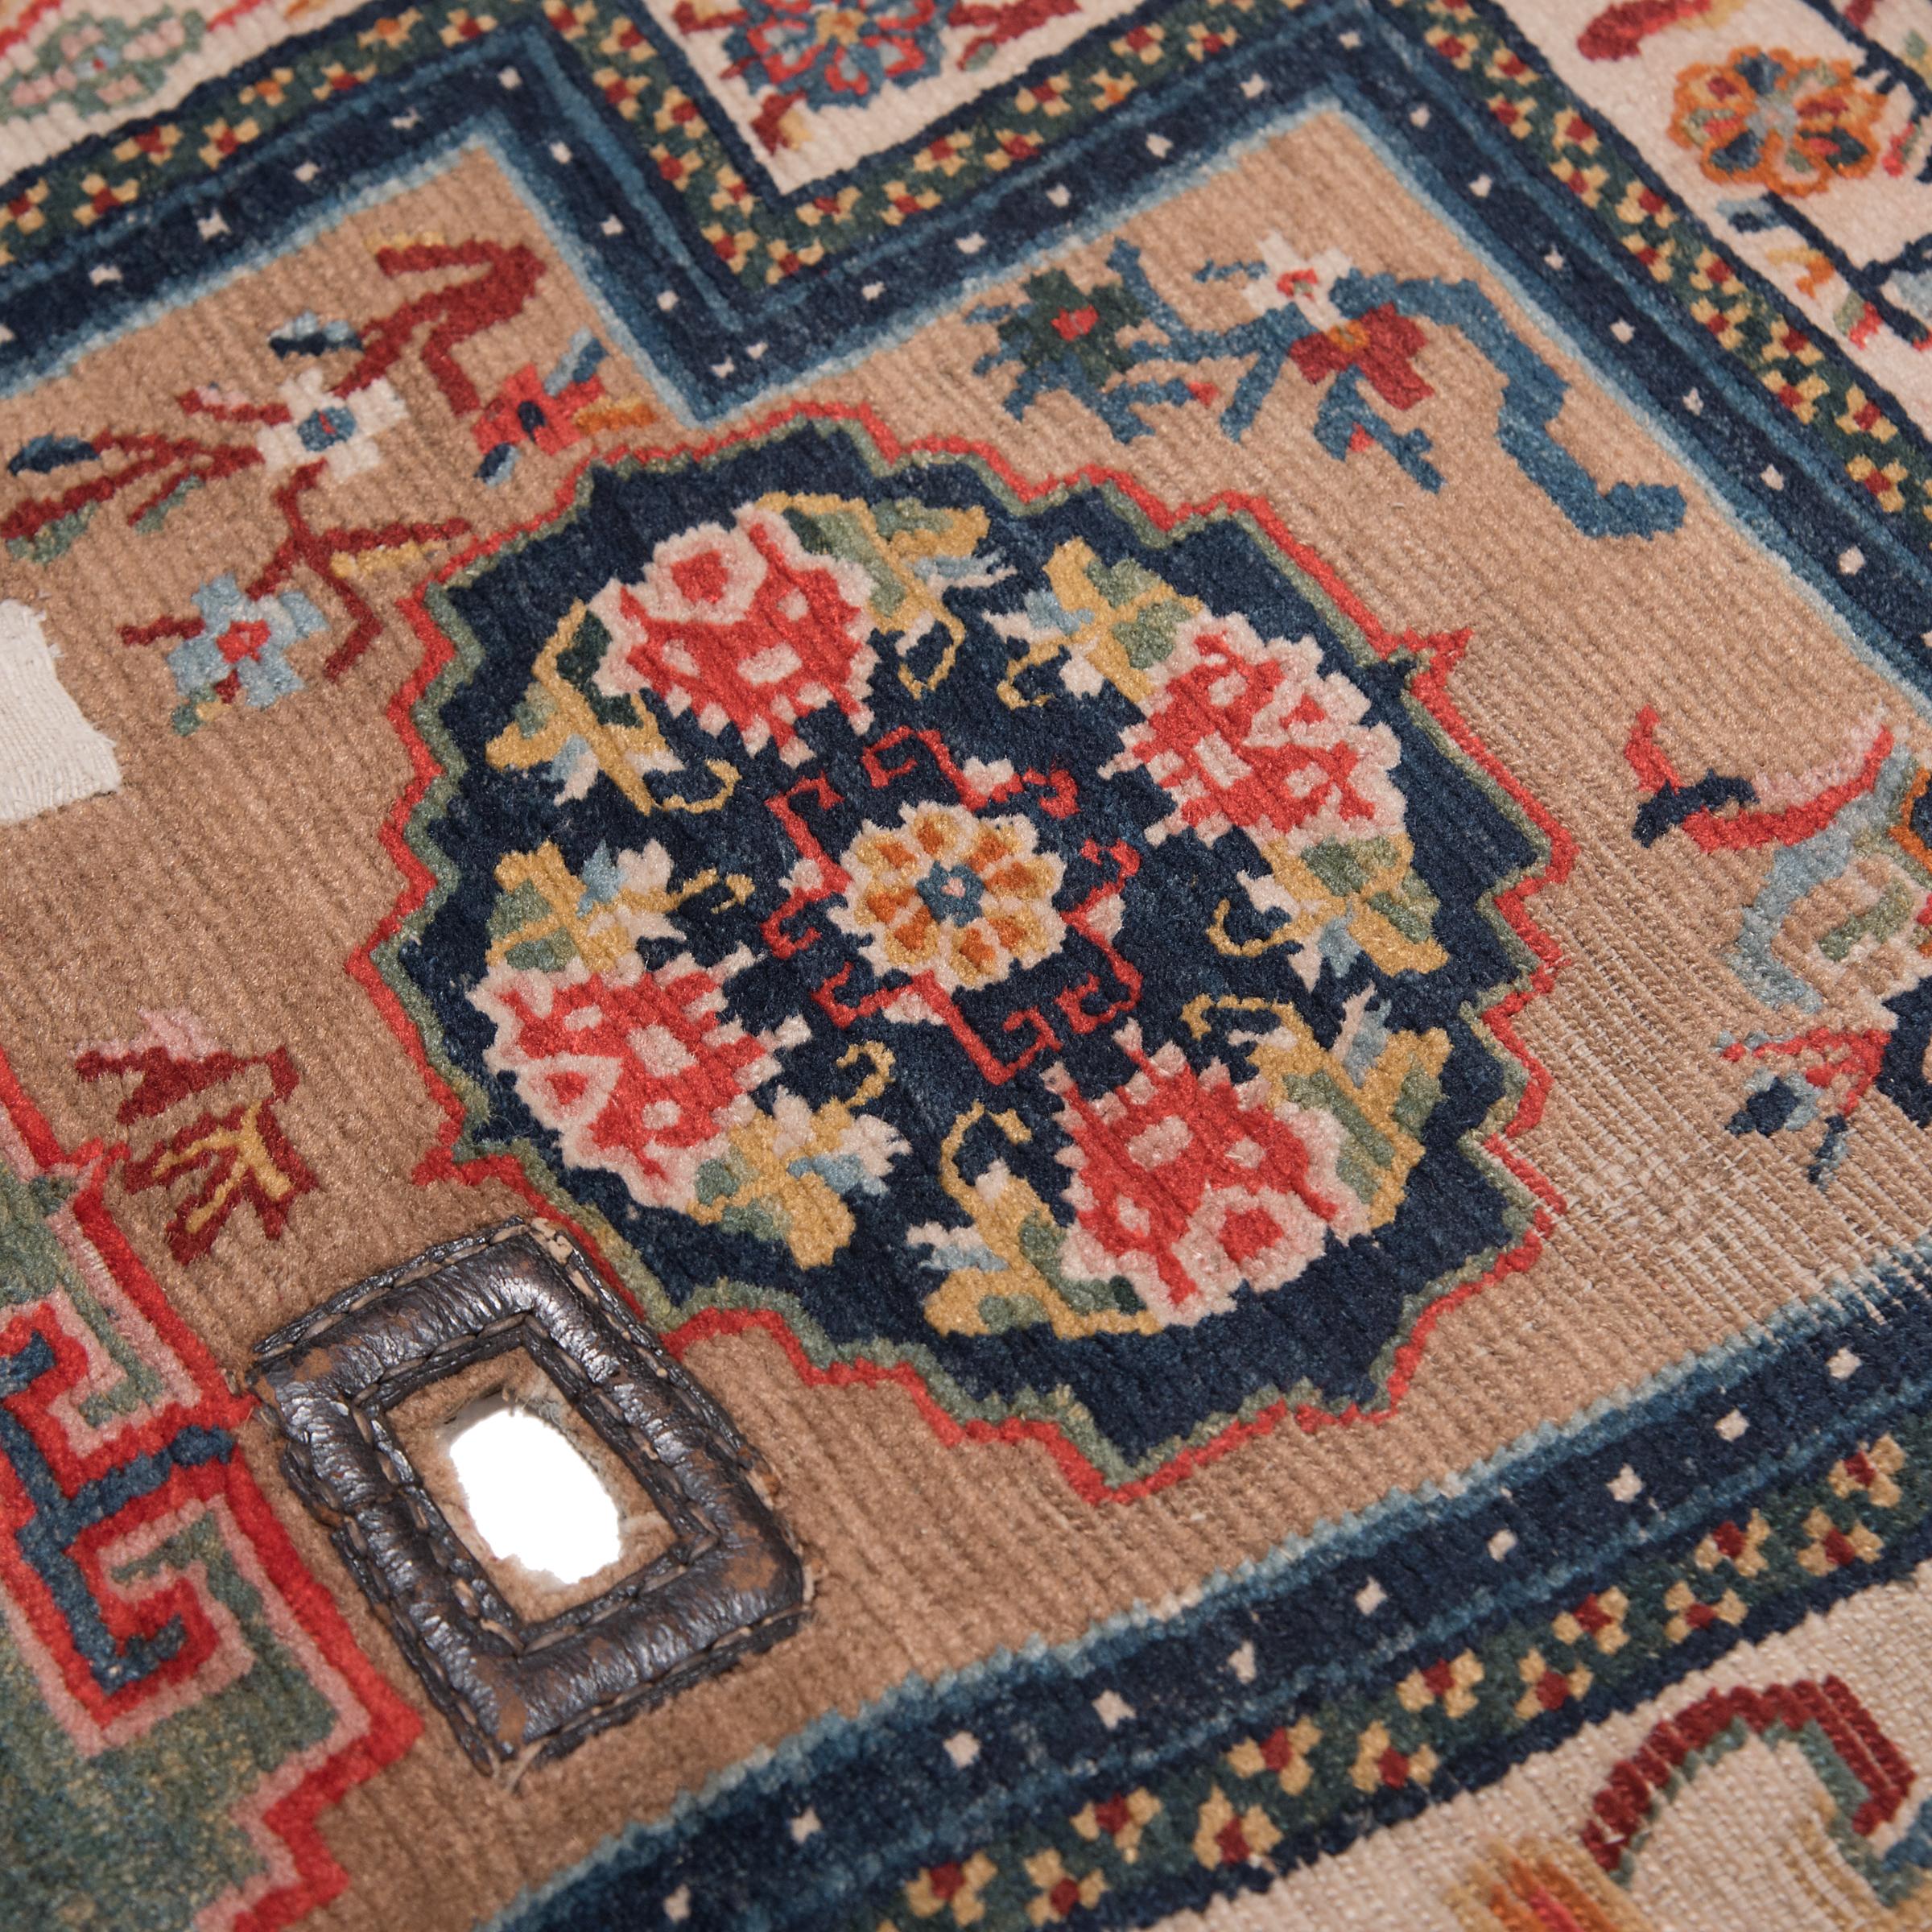 Vegetable Dyed Tibetan Saddle Carpet with Scholars' Objects, c. 1900 For Sale